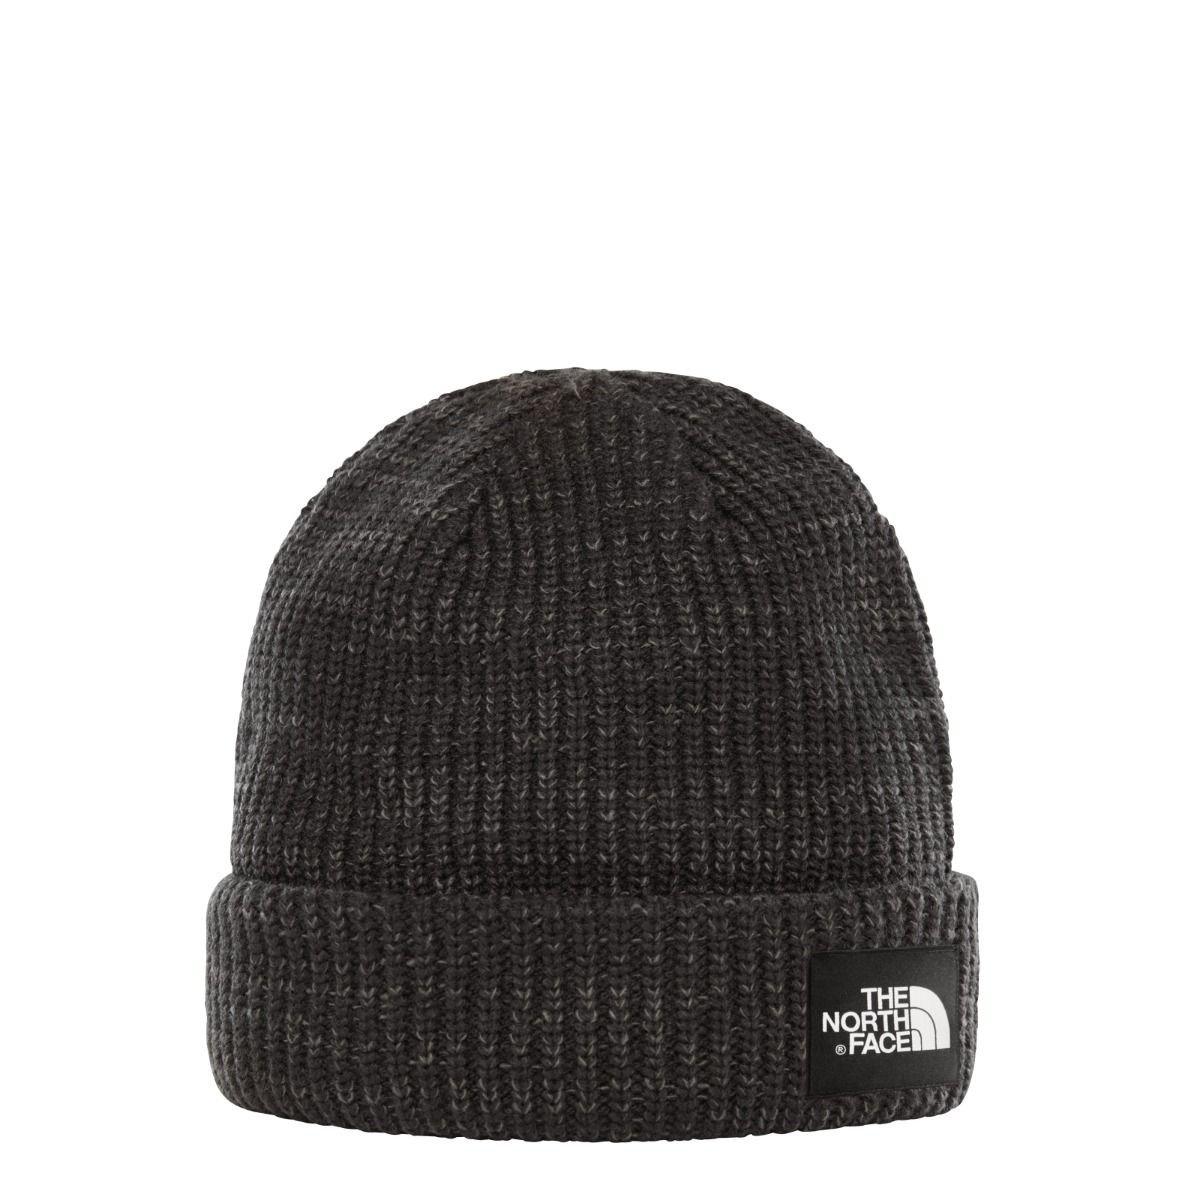 THE NORTH FACE  SALTY DOG BEANIE-0 